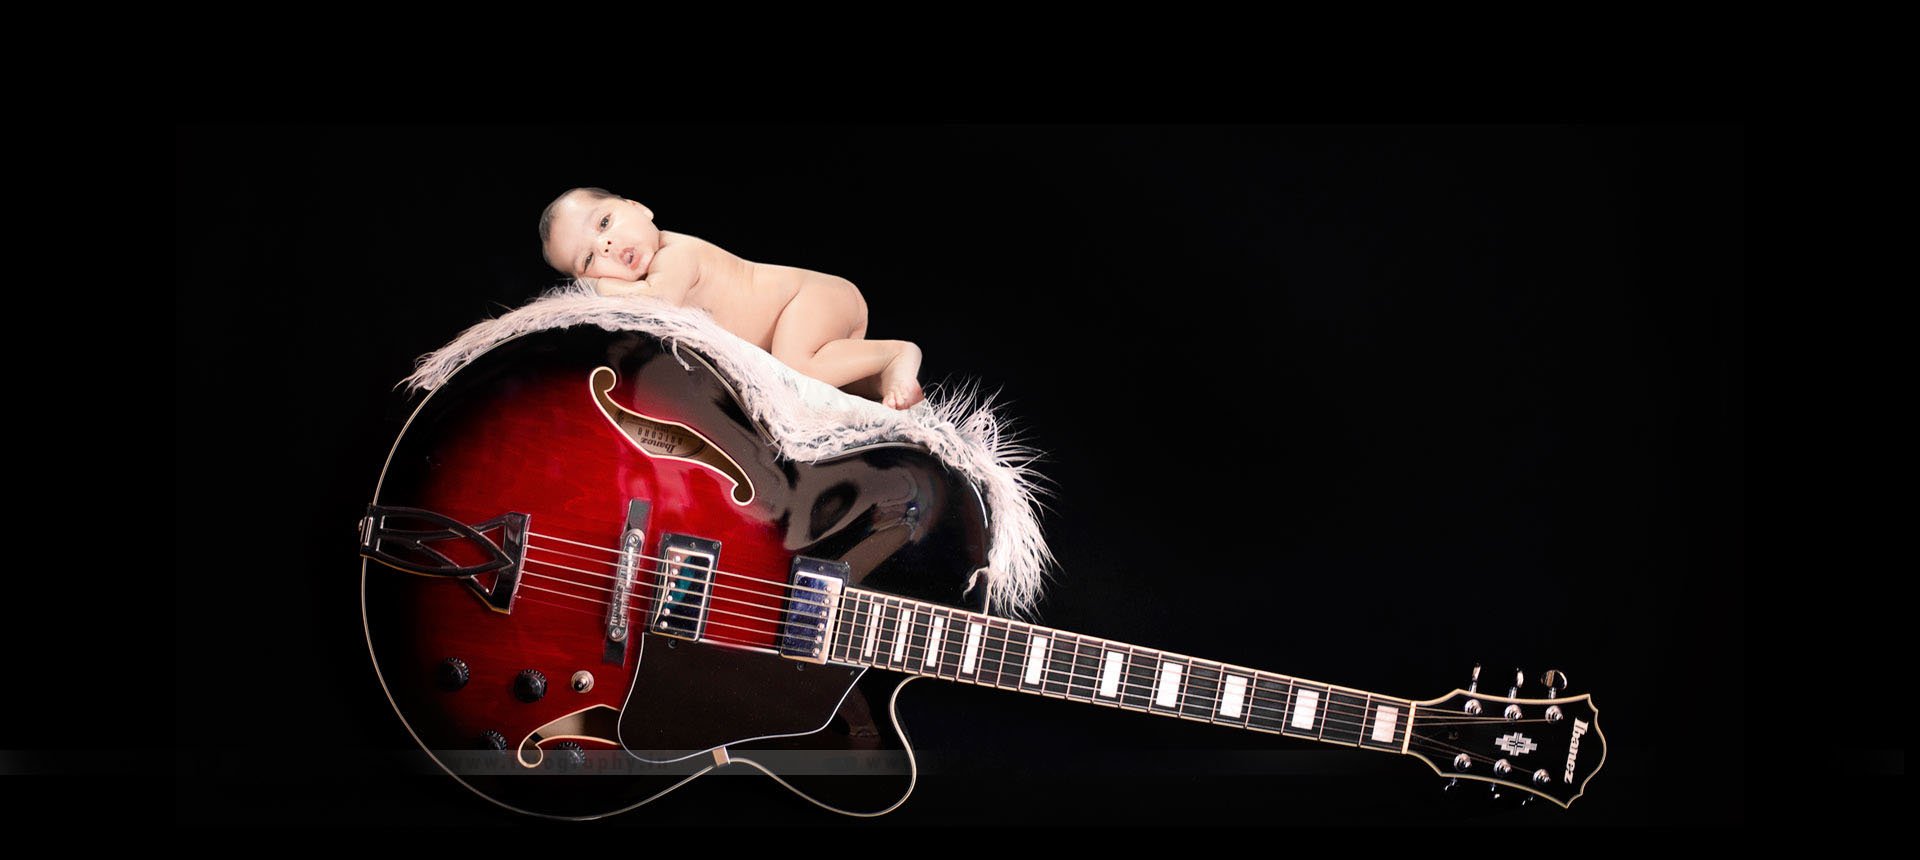 Theme picture- baby on Guitar